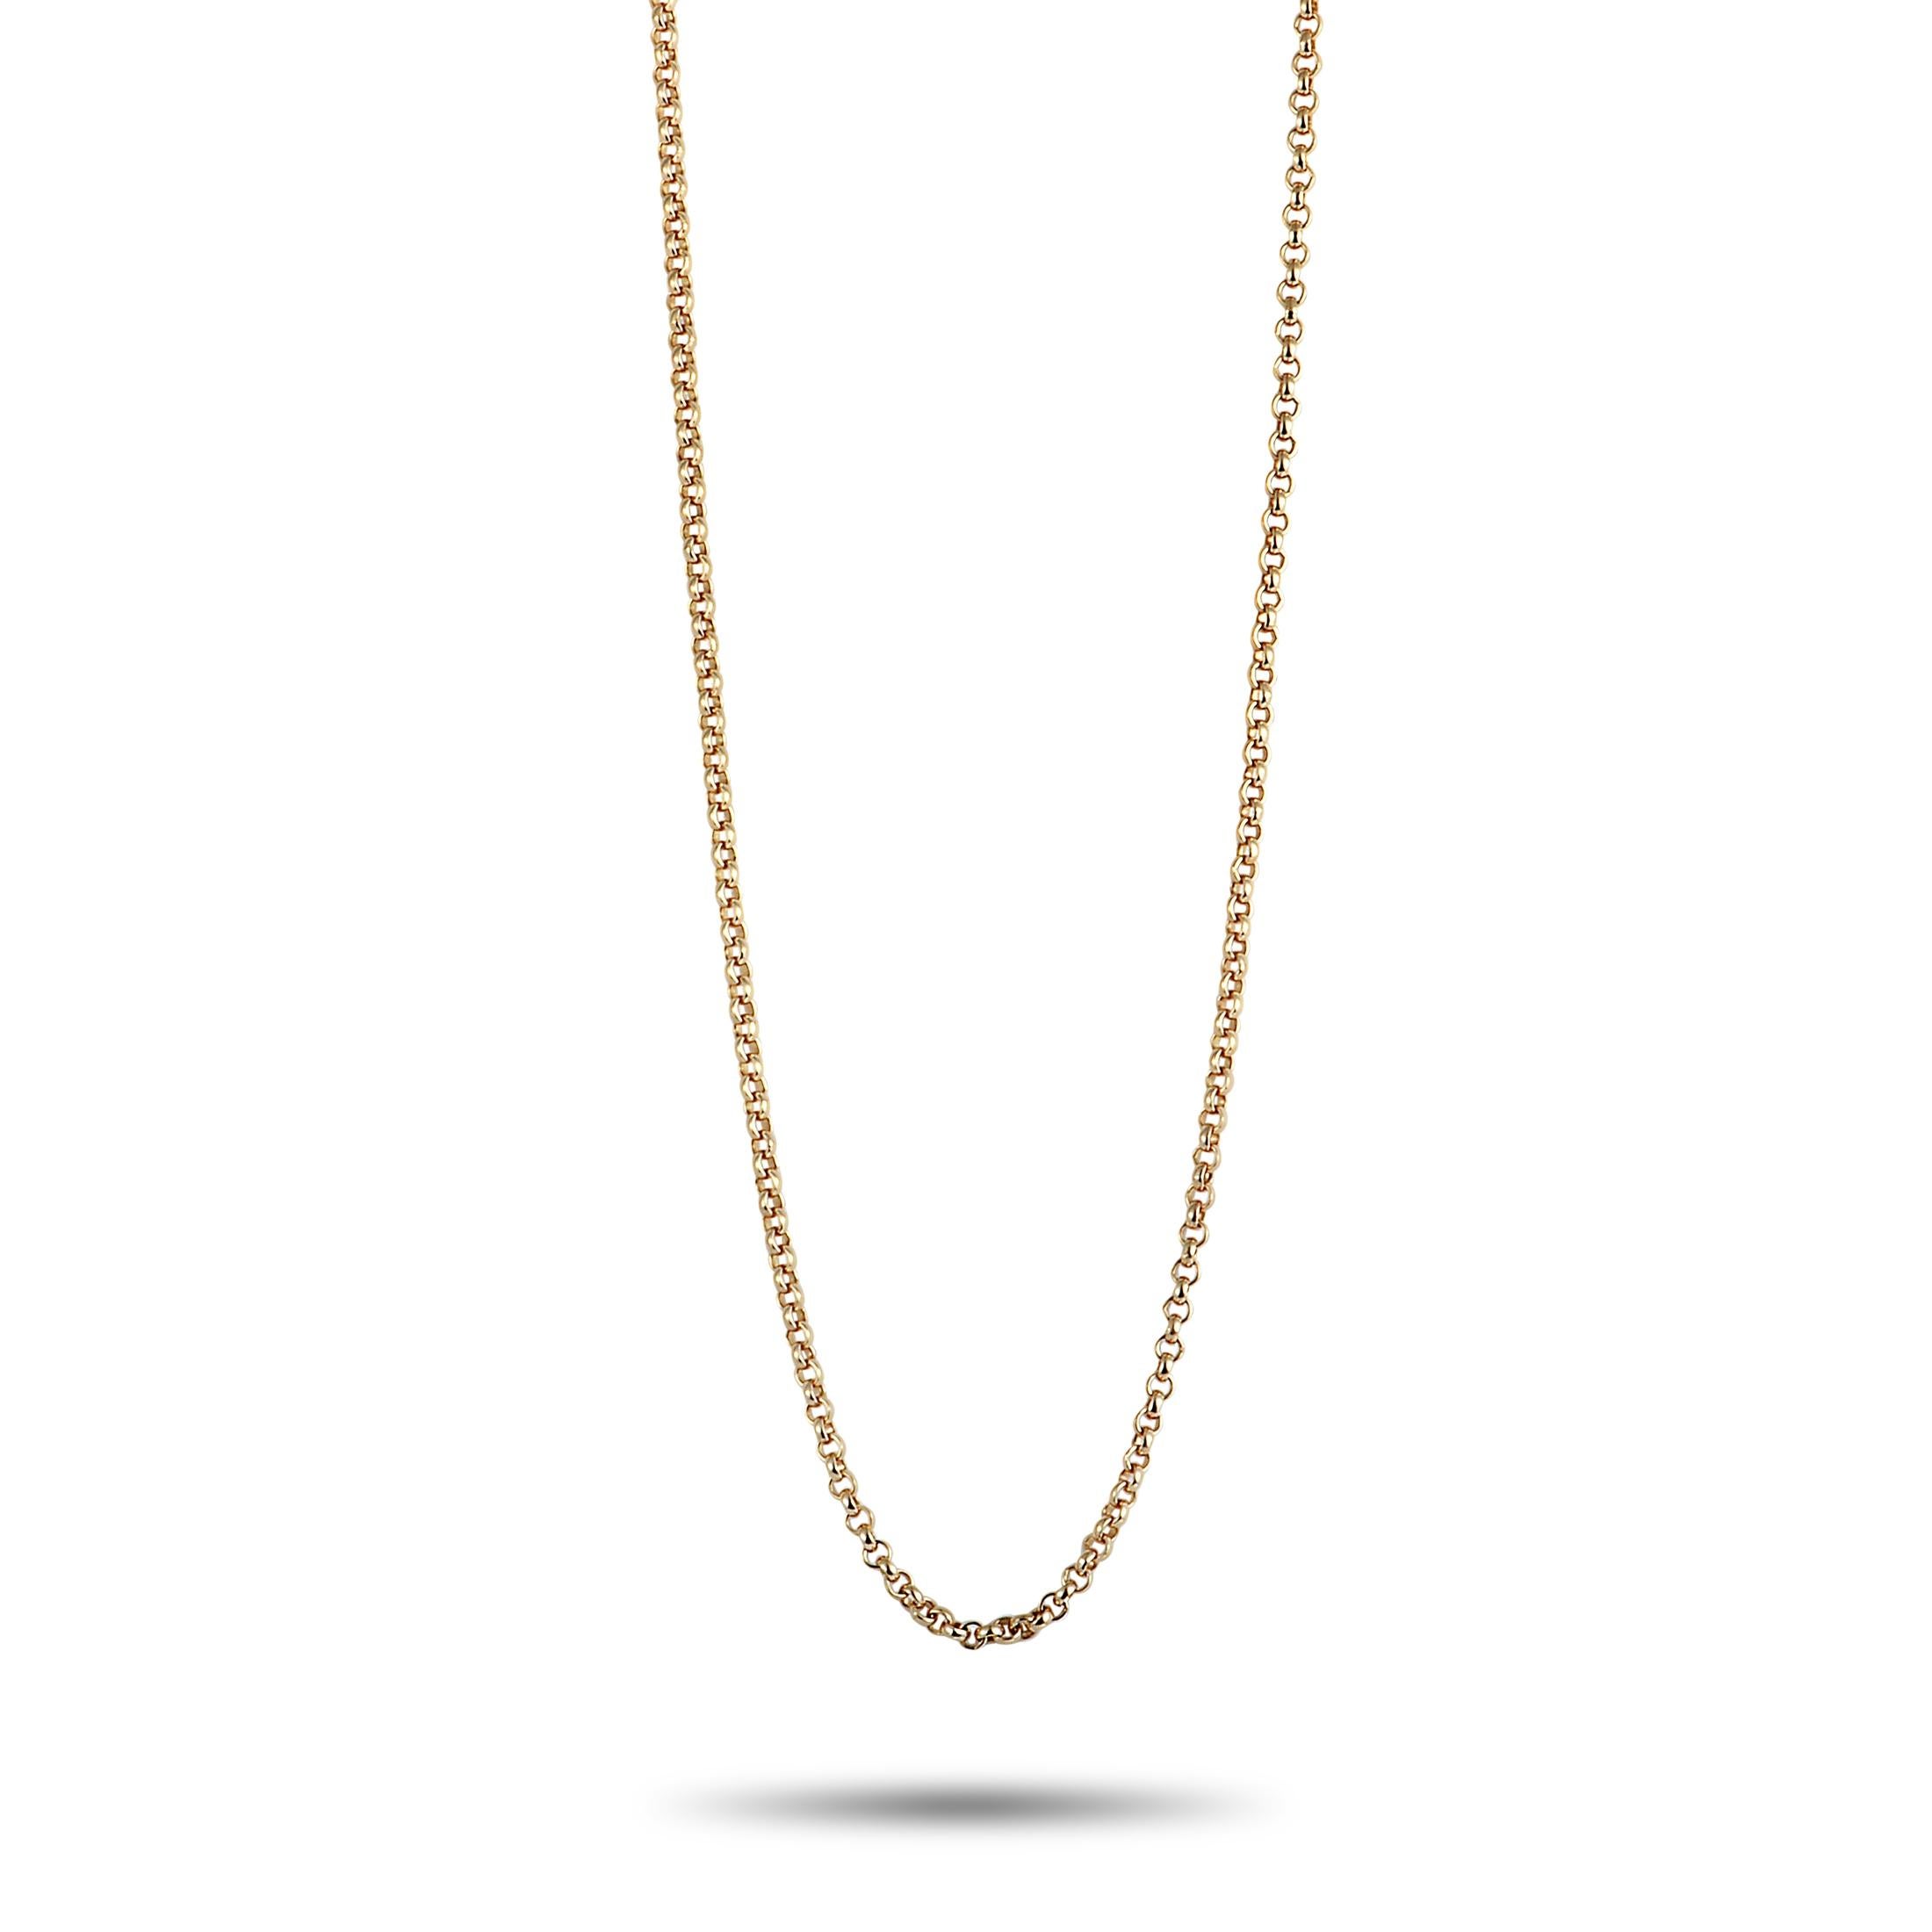 Add a graceful touch of refined femininity to your ensembles by accessorizing with this gorgeous Bucherer necklace that boasts a splendidly sophisticated design and exquisite craftsmanship quality. The necklace is made of enchanting 18K rose gold